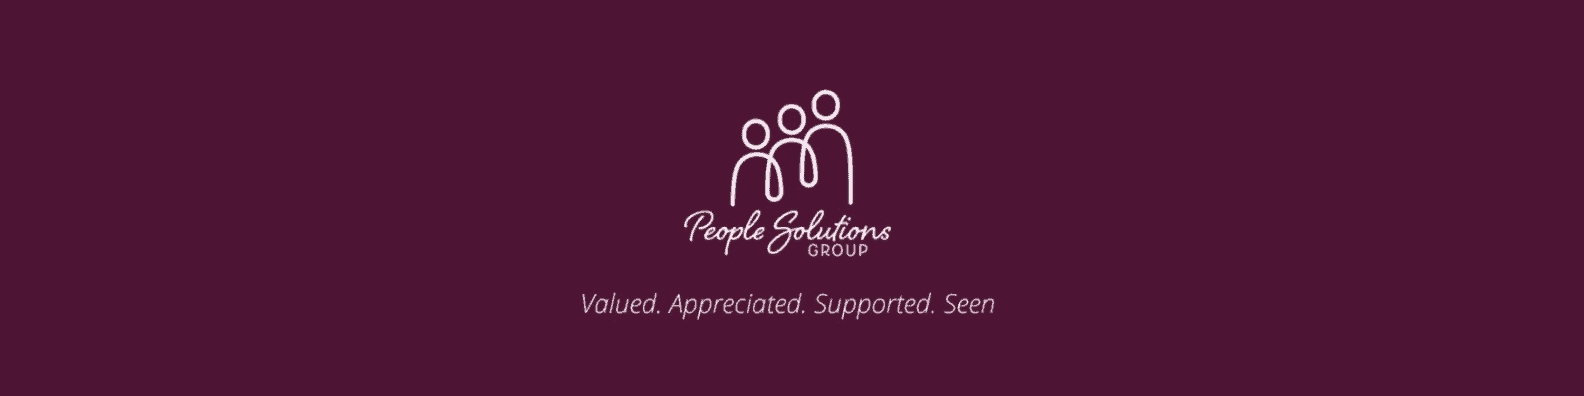 People-Solutions-Group-Banner-Newww.png